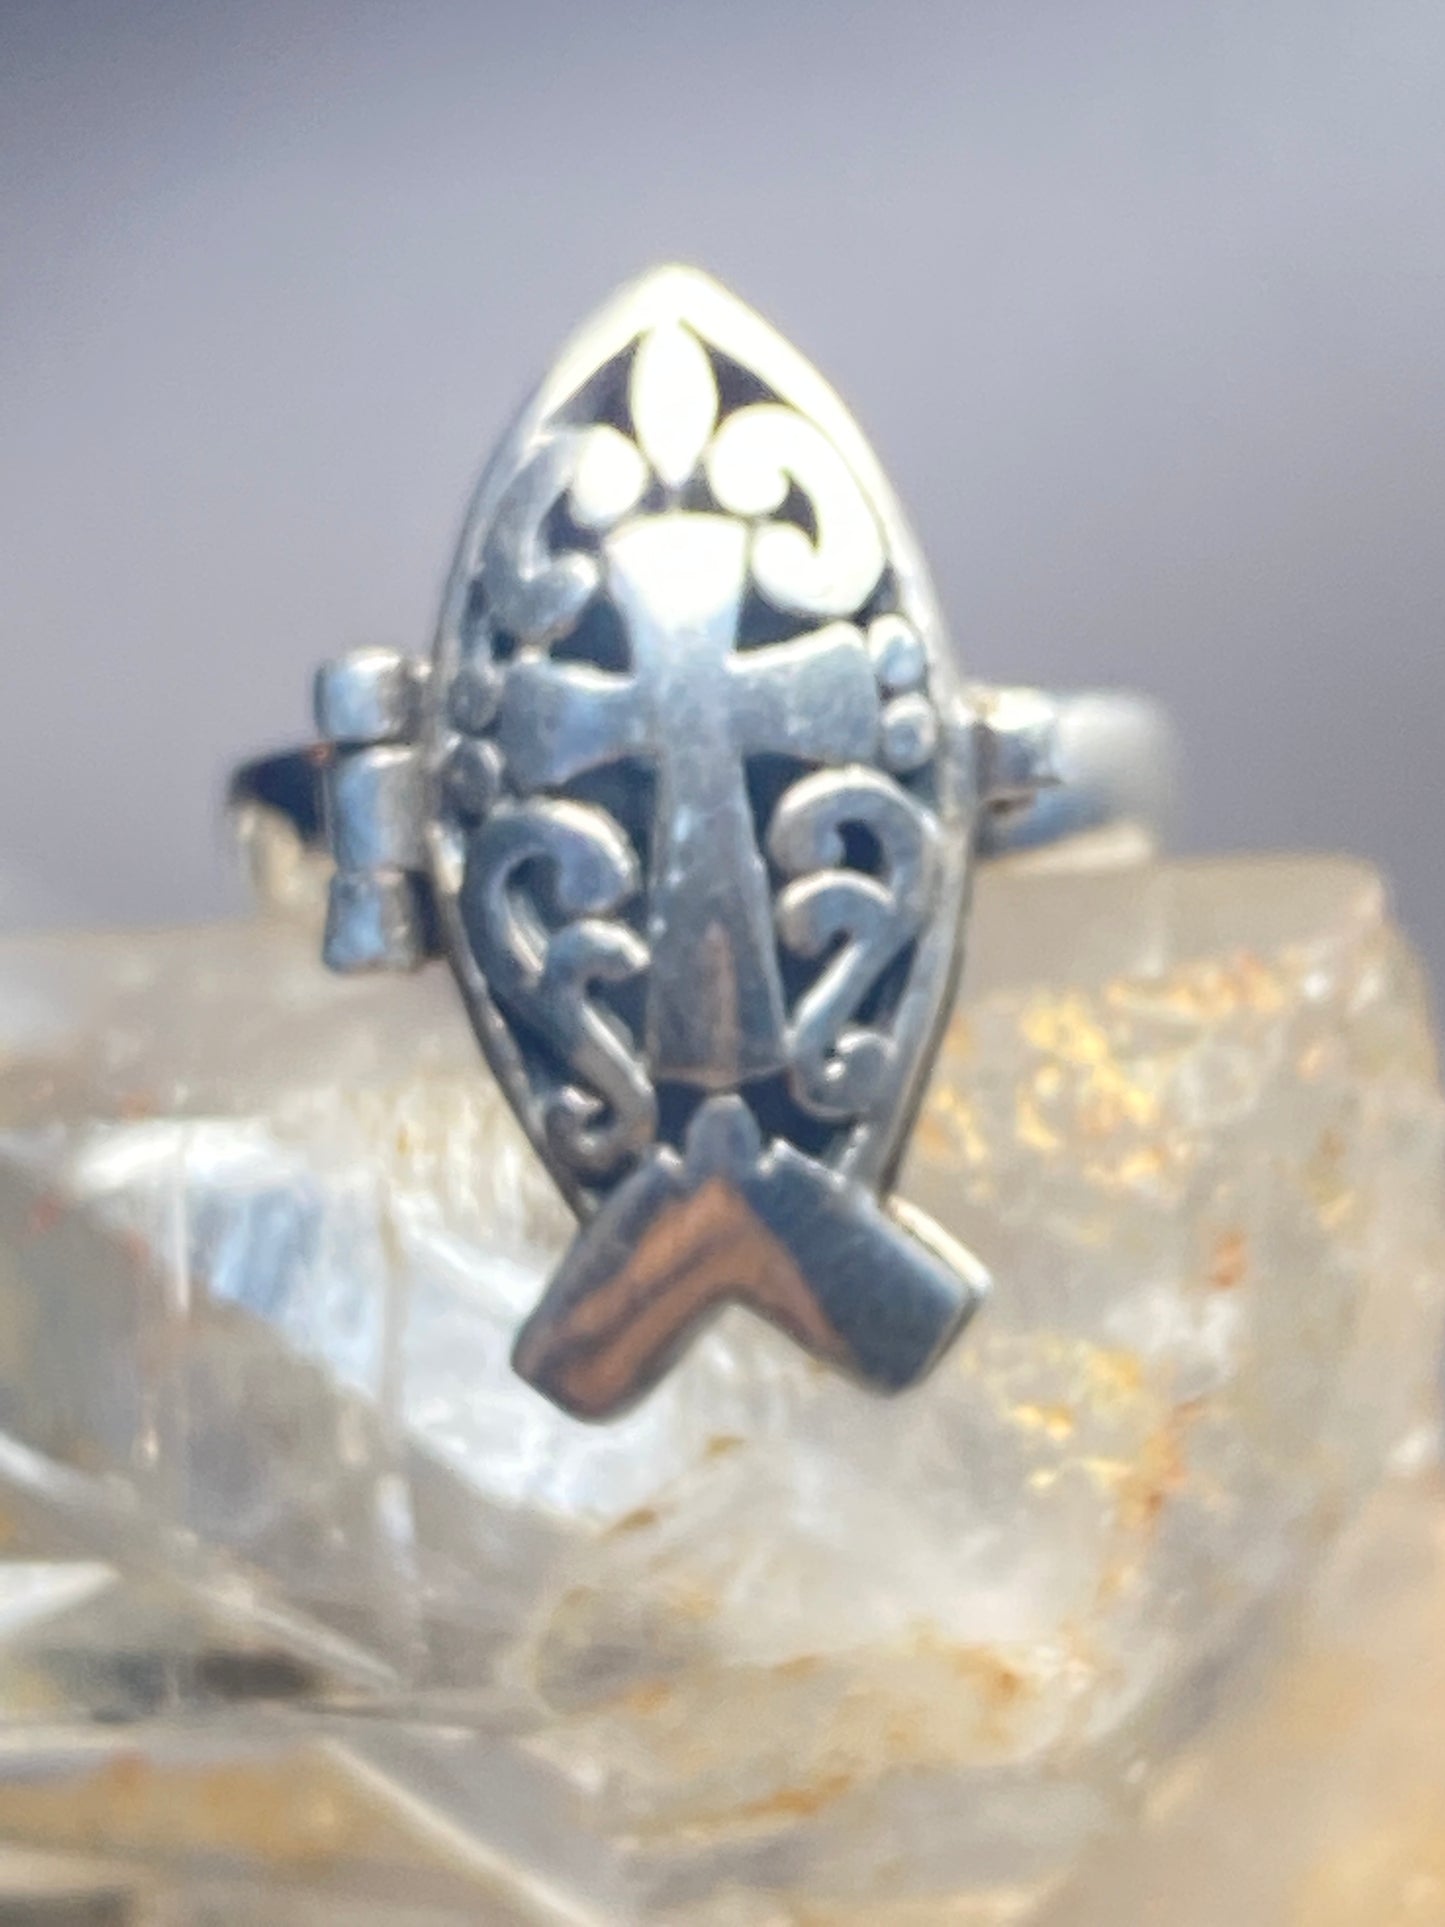 Poison ring size 7.50 cross fish band sterling silver women